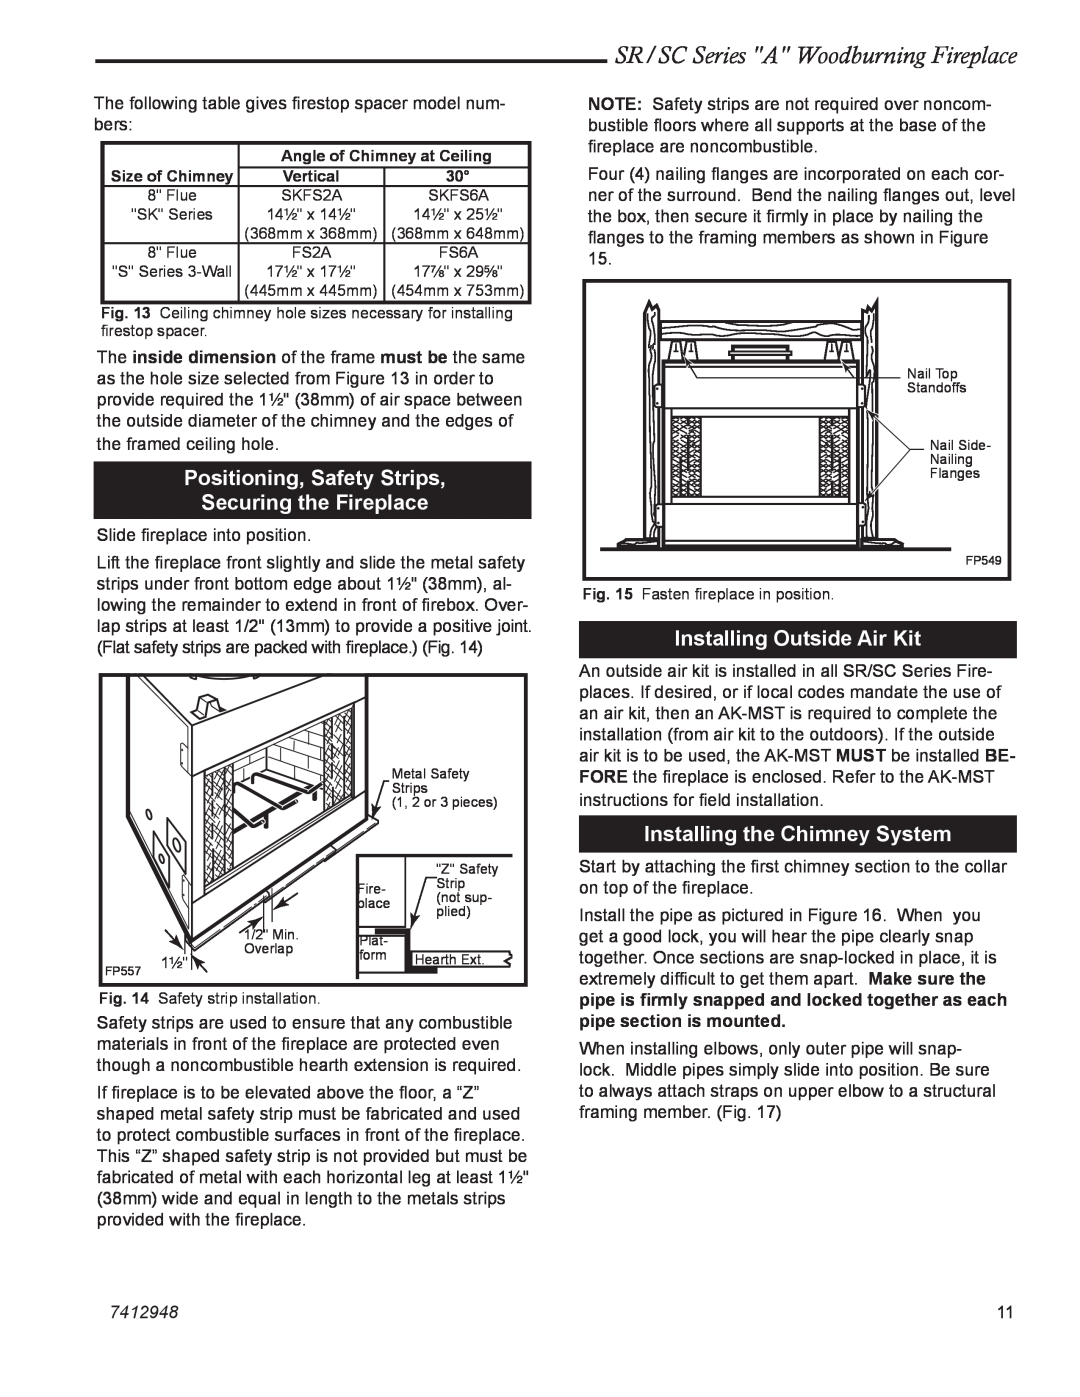 Vermont Casting SC36A, SR42A, SR36A Positioning, Safety Strips Securing the Fireplace, Installing Outside Air Kit, 7412948 